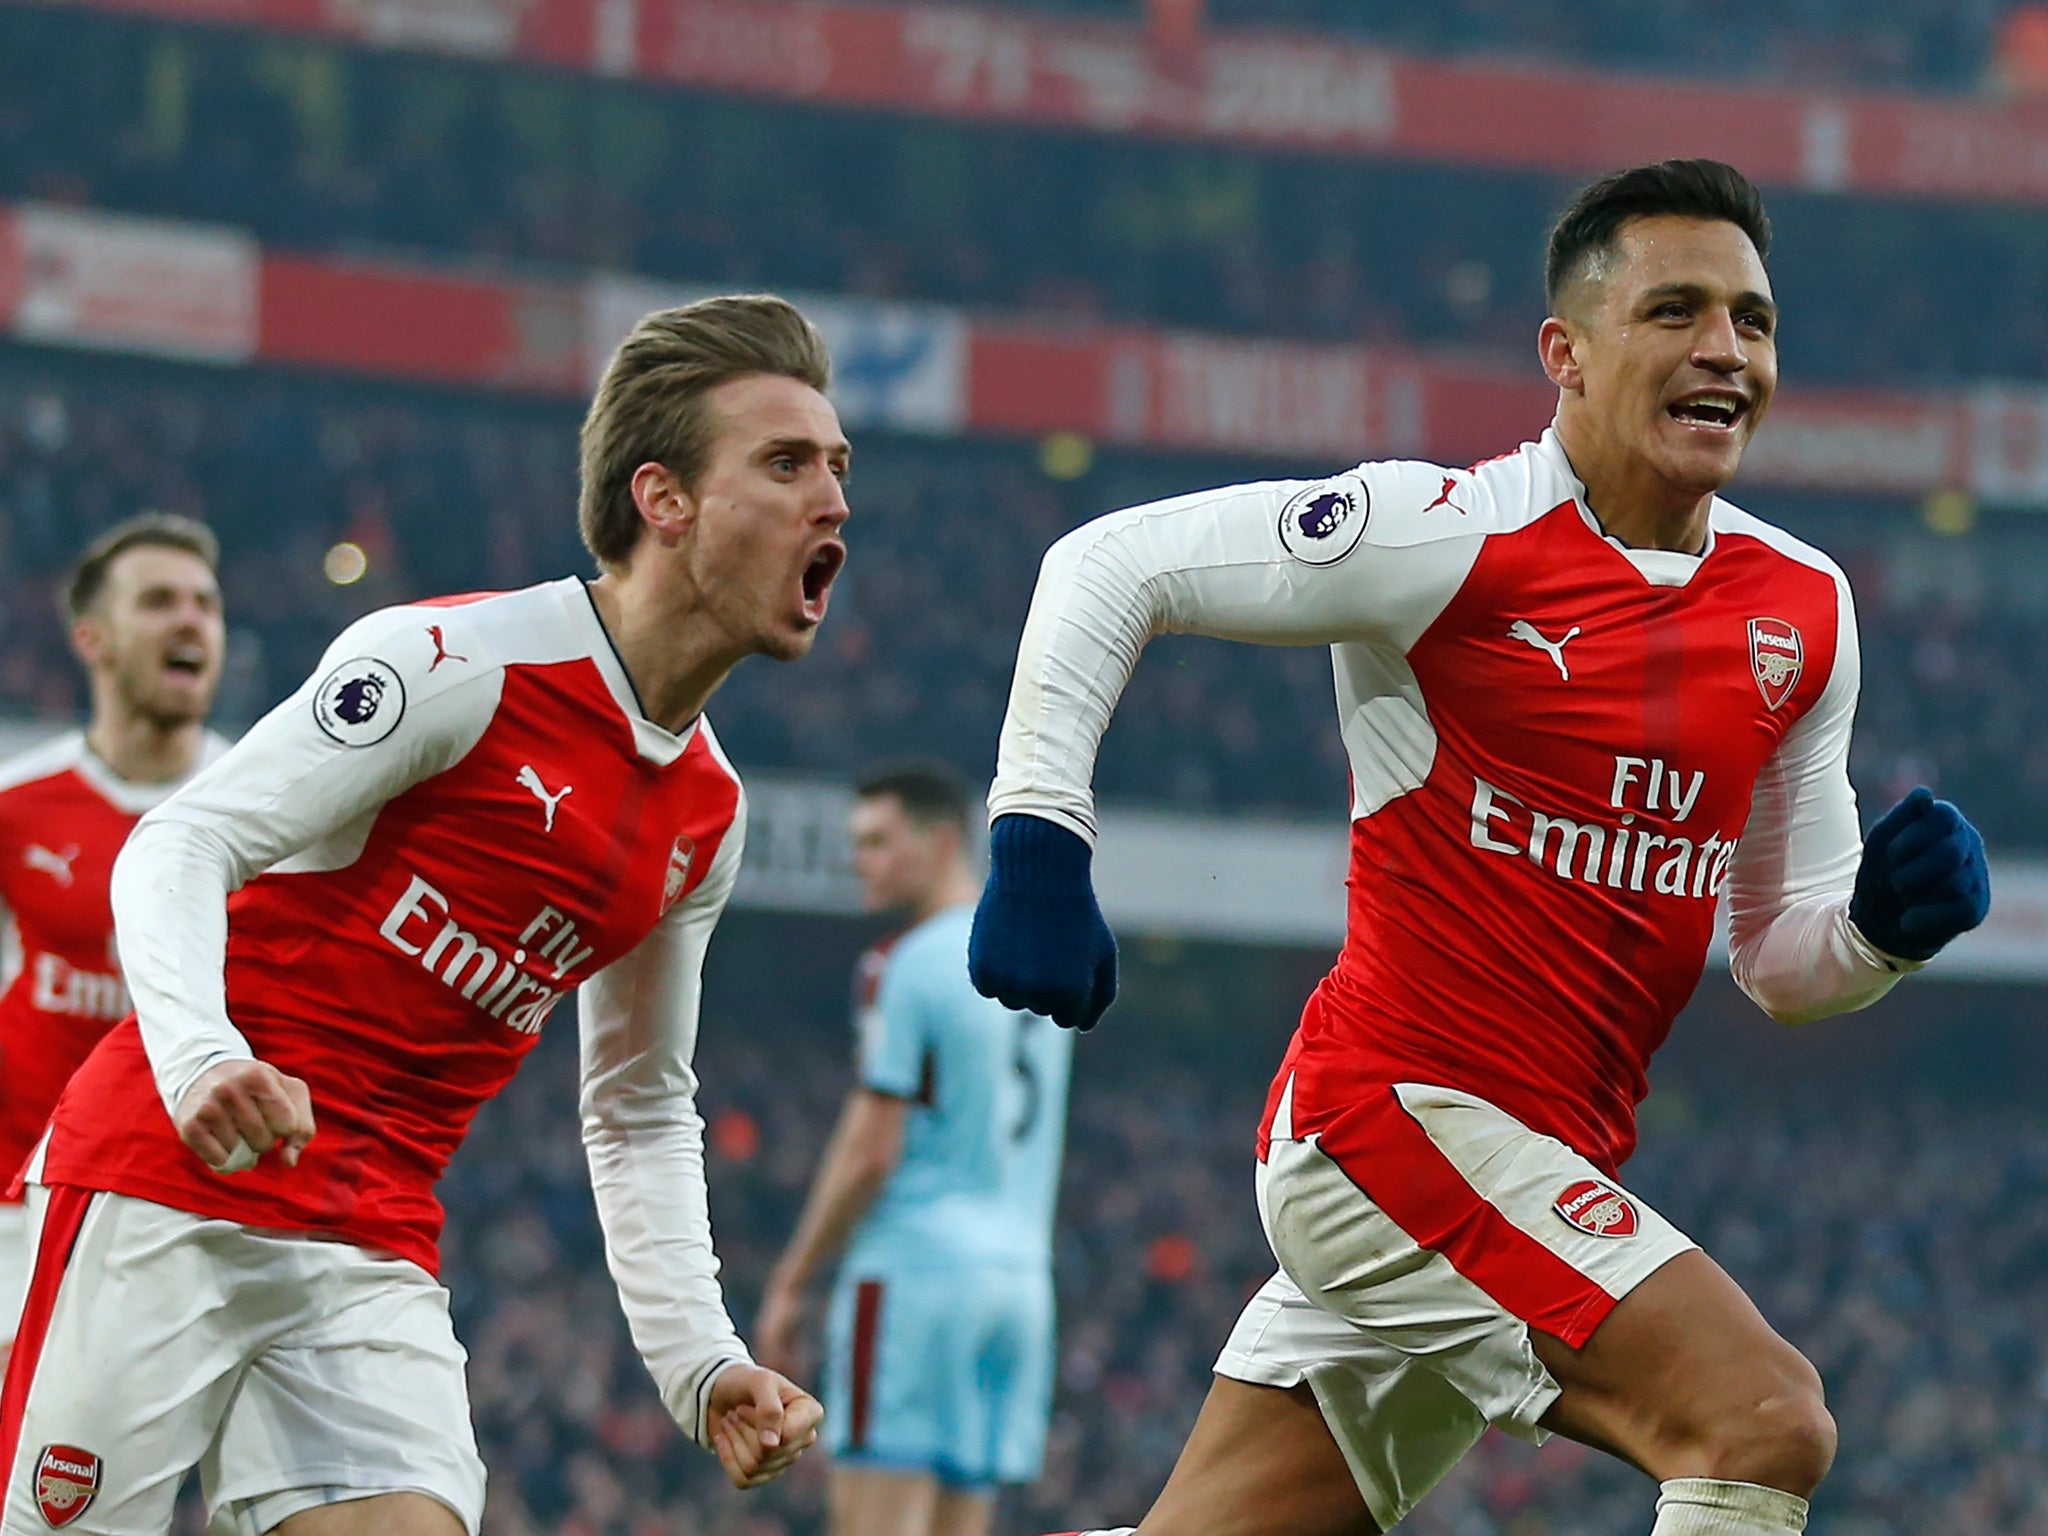 Alexis Sanchez kept his nerve to cheekily lob the ball past Tom Heaton in stoppage time